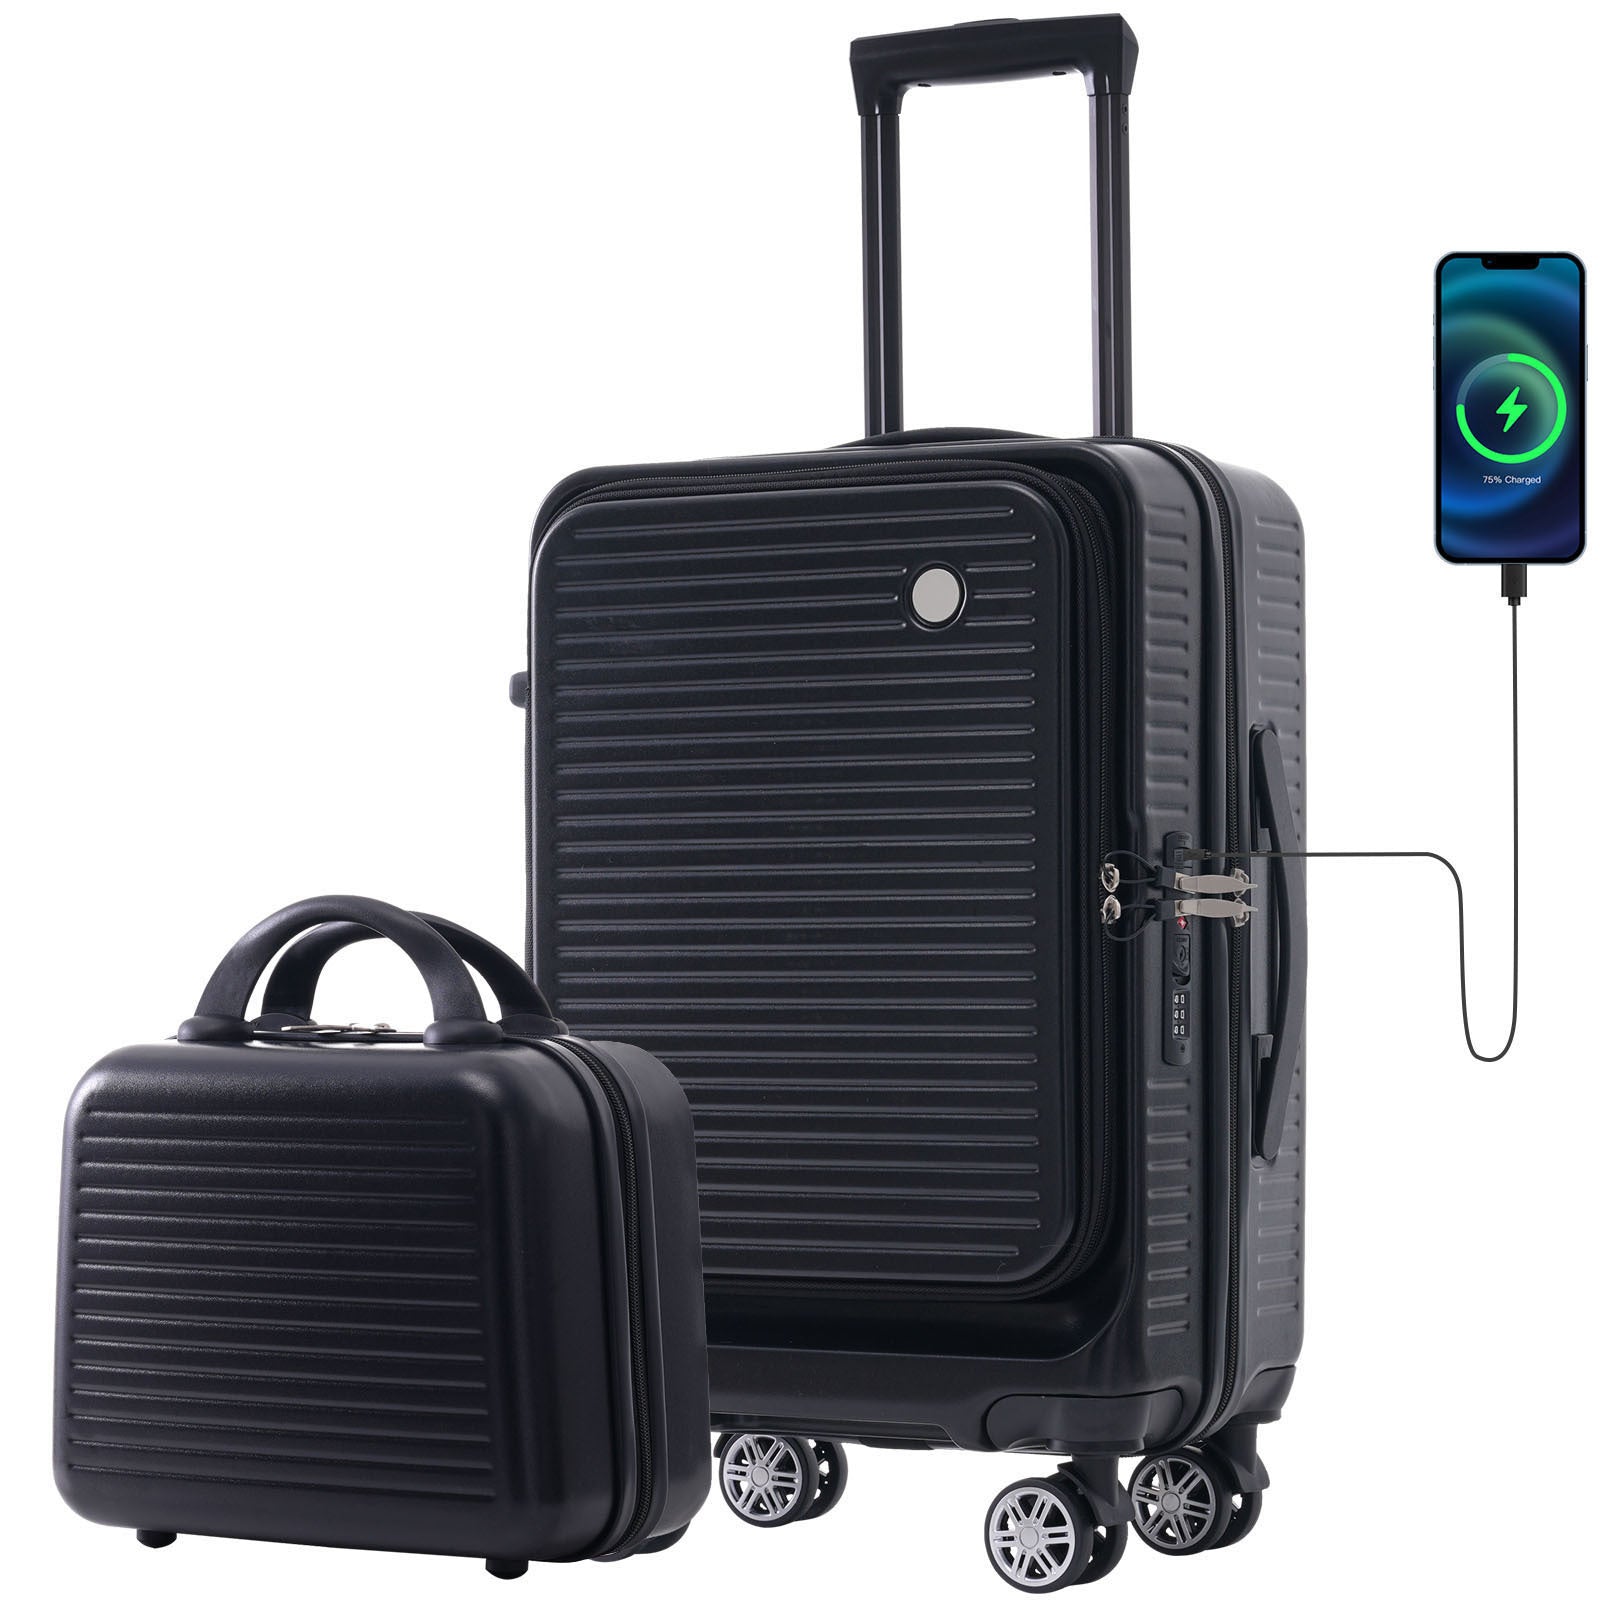 Carry on Luggage 20 Inch Front Open Luggage black-abs